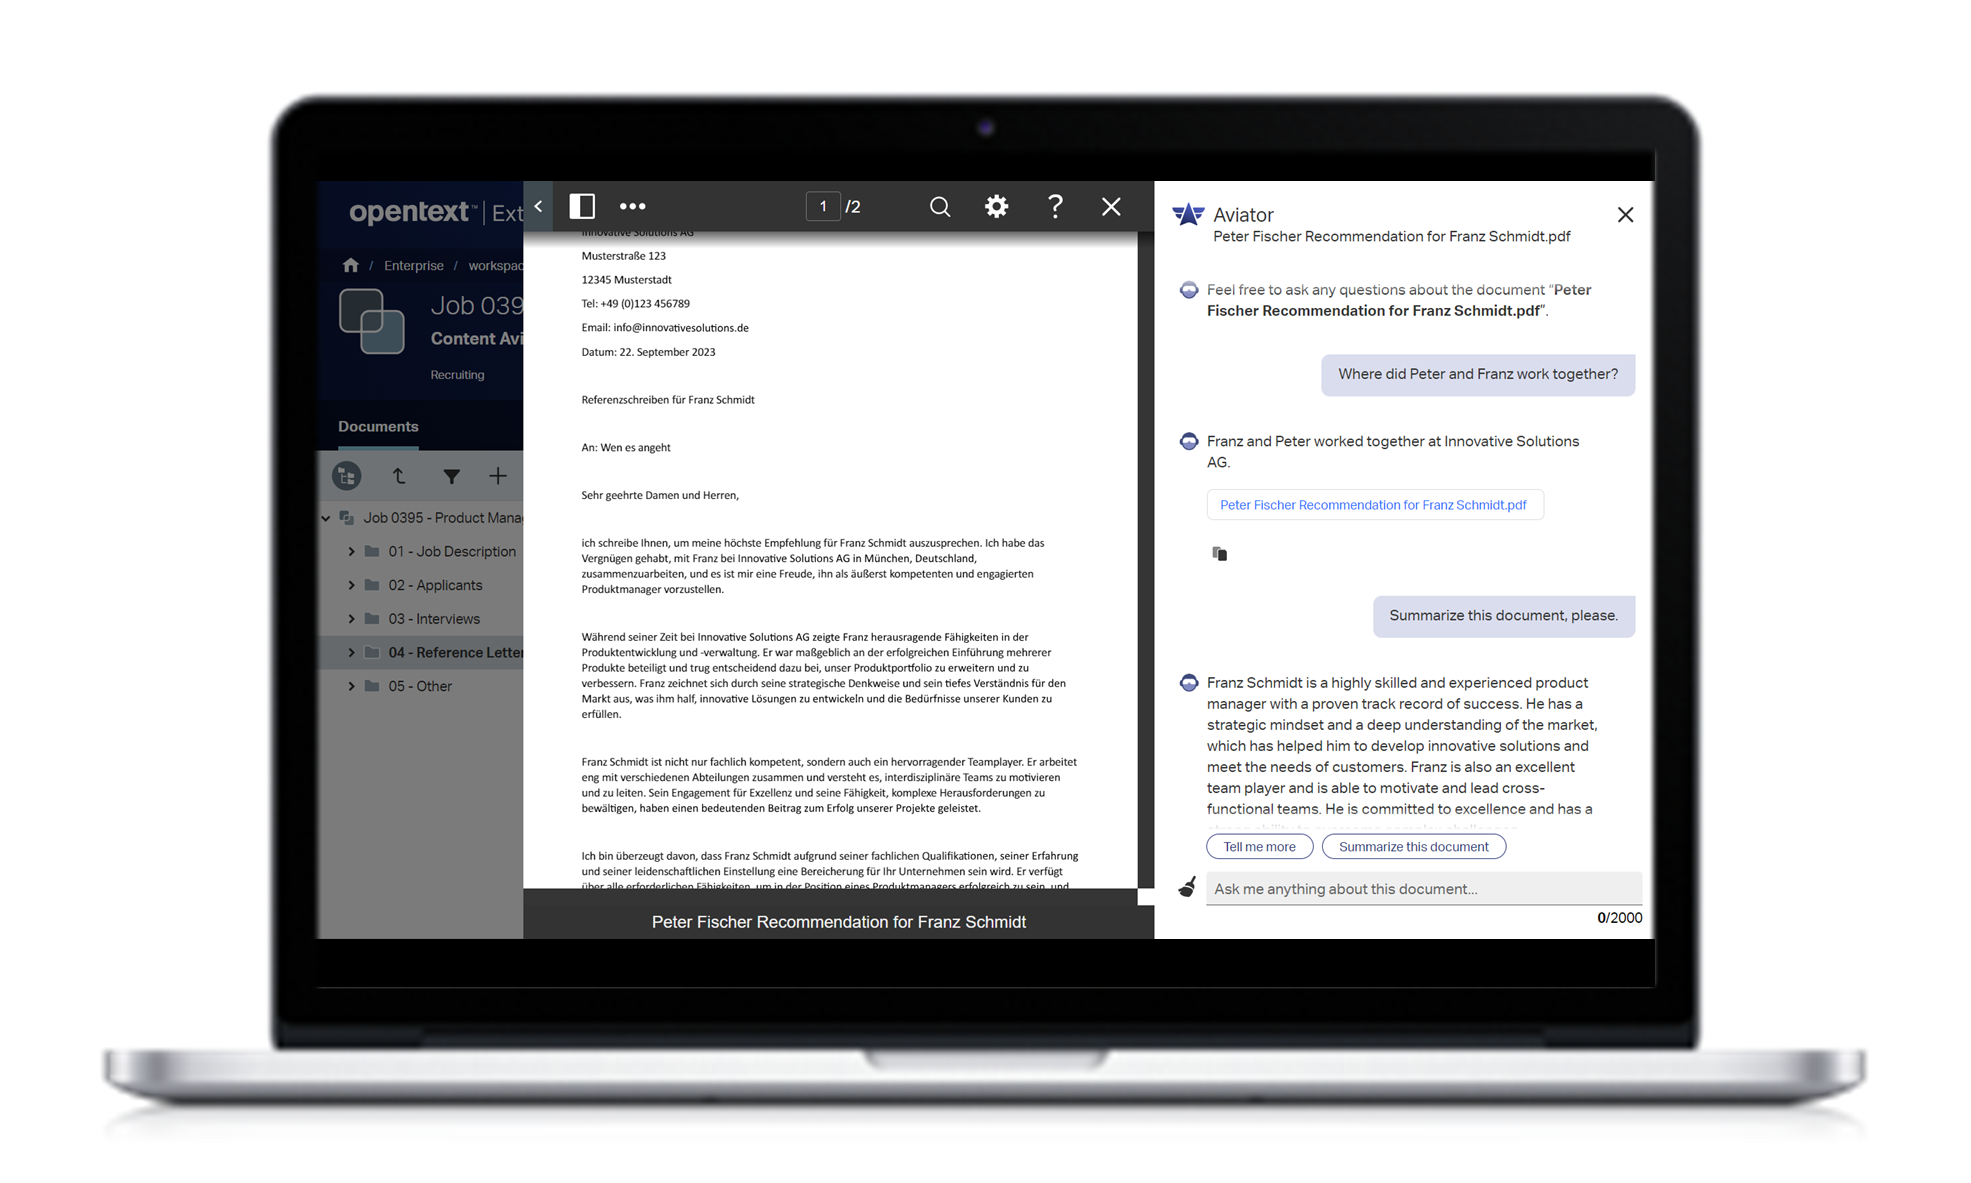 Content Aviator uses conversational search to summarize documents and find key content within your documents, quickly and easily.